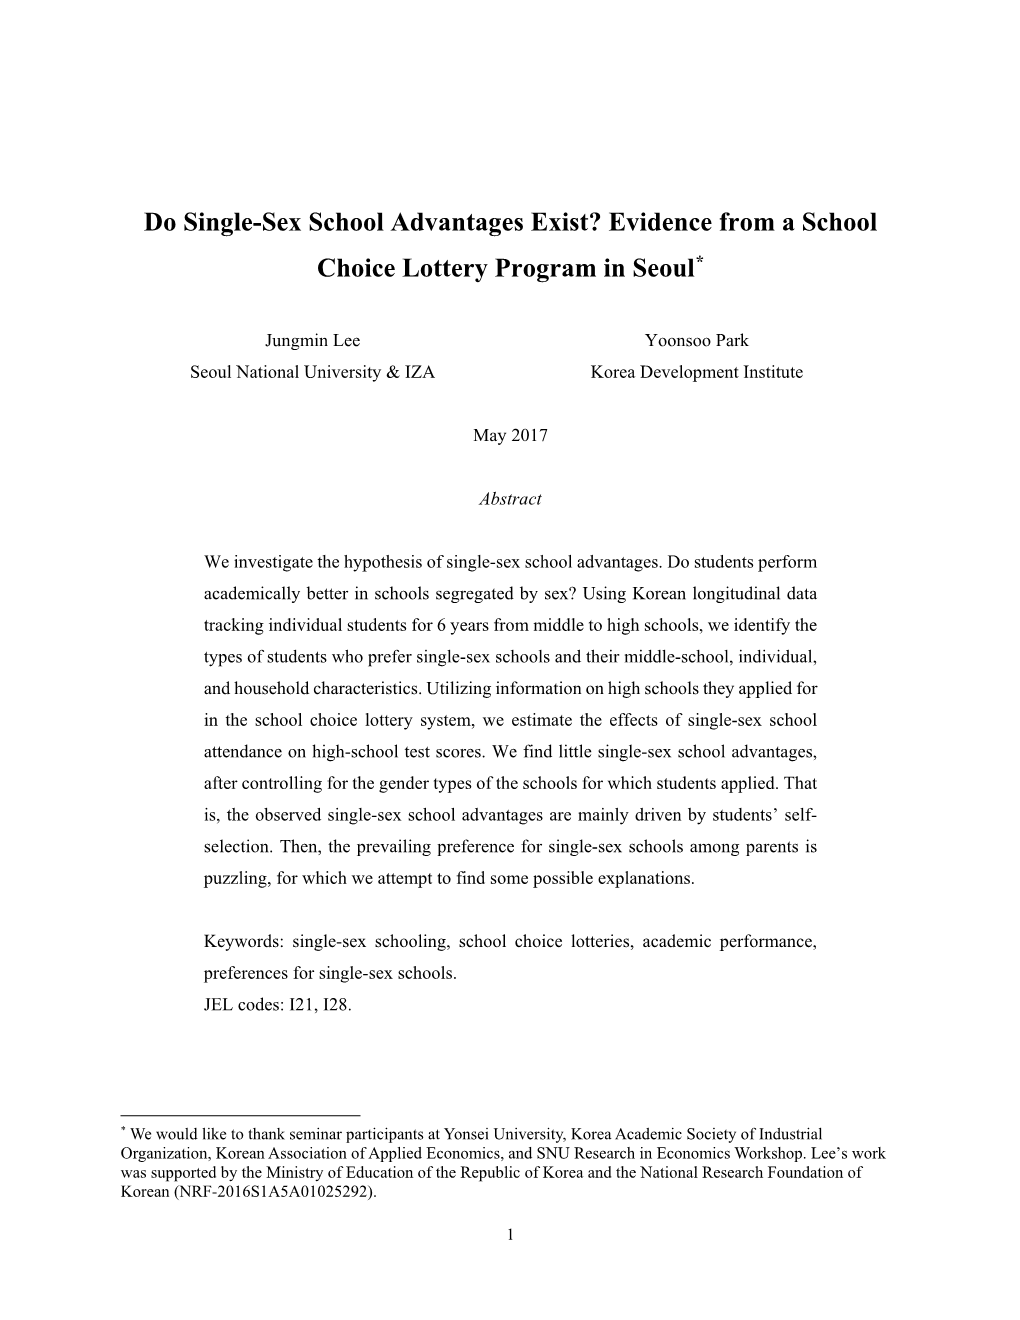 Do Single-Sex School Advantages Exist? Evidence from a School Choice Lottery Program in Seoul*